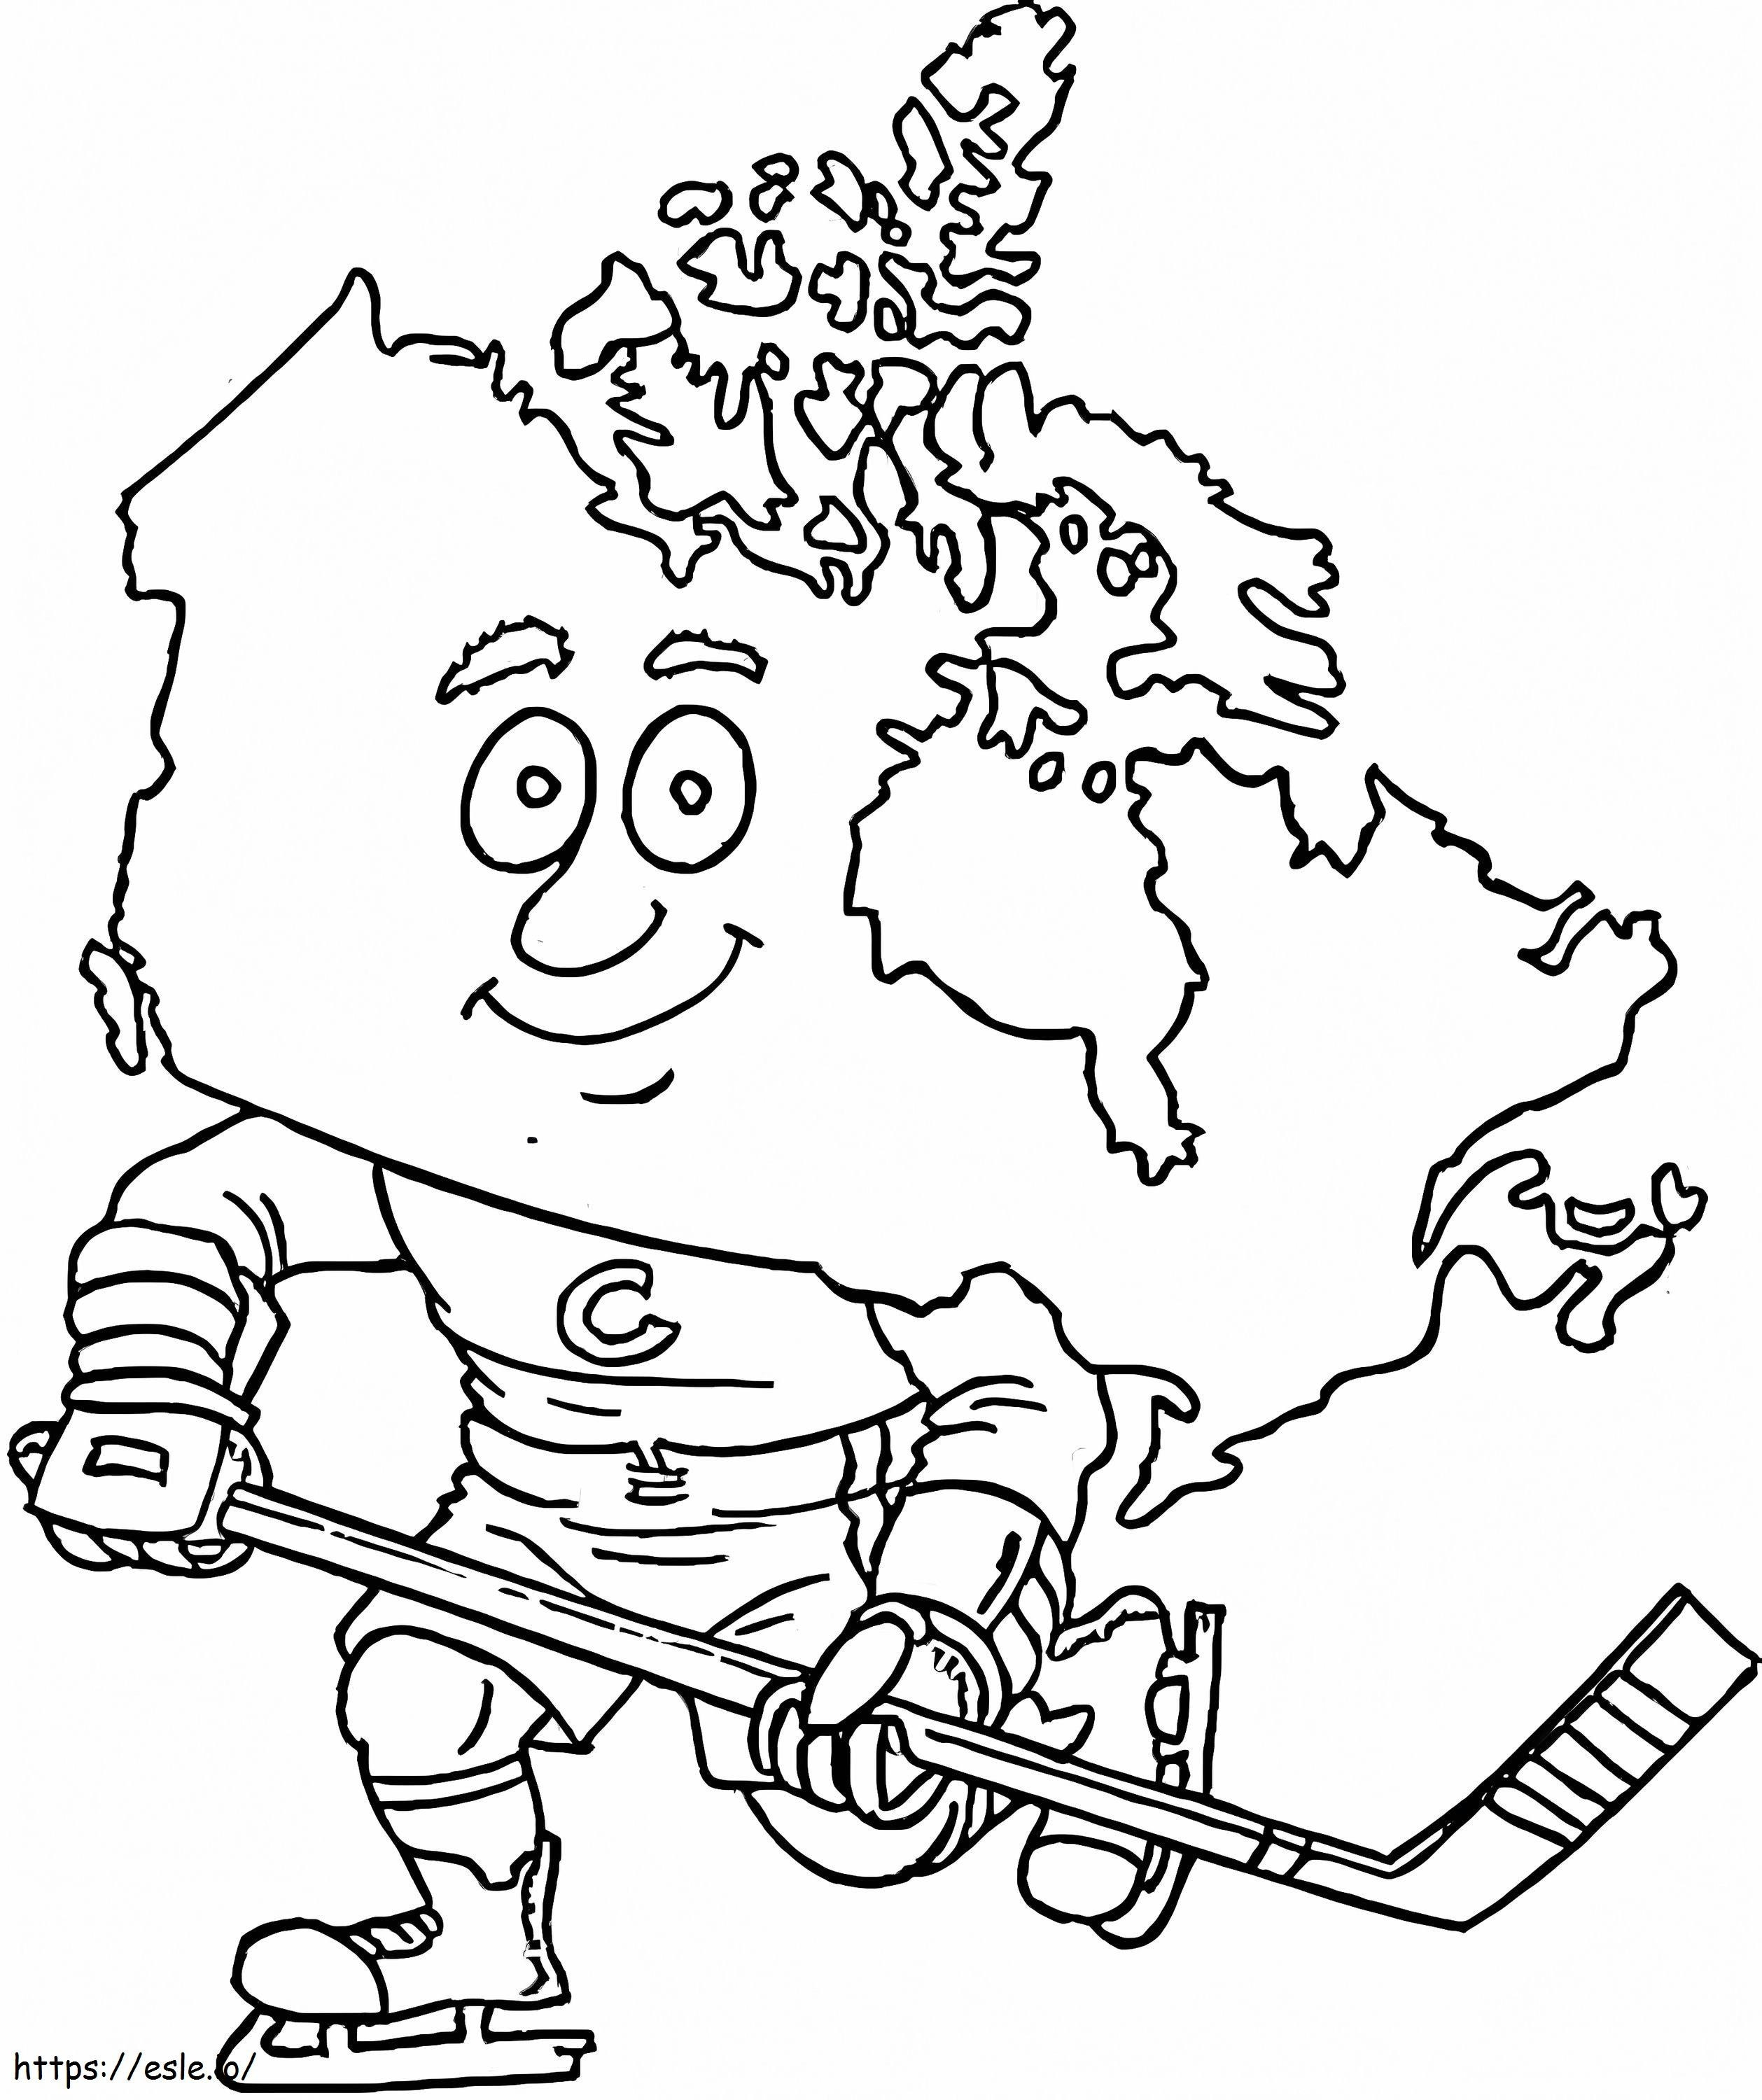 Canadian Map coloring page